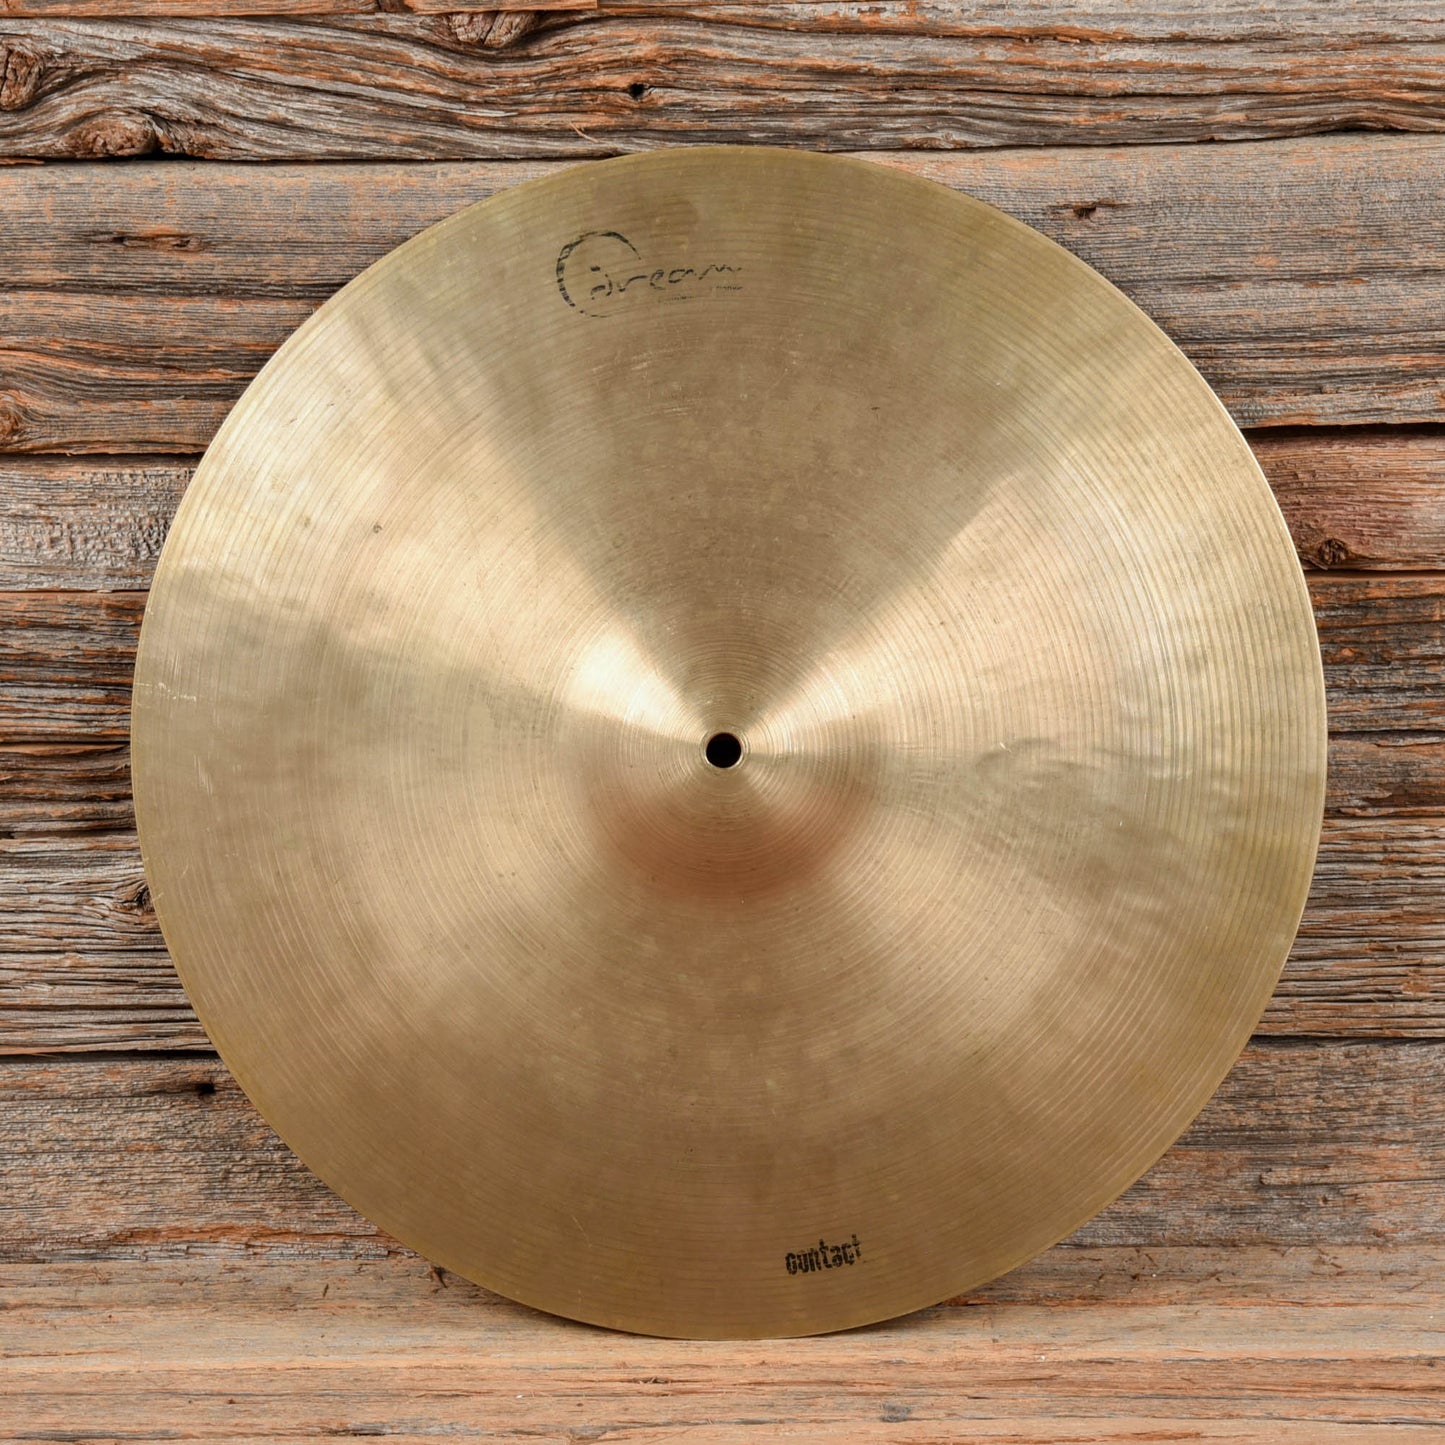 Dream 18" Contact Crash Ride Cymbal USED Drums and Percussion